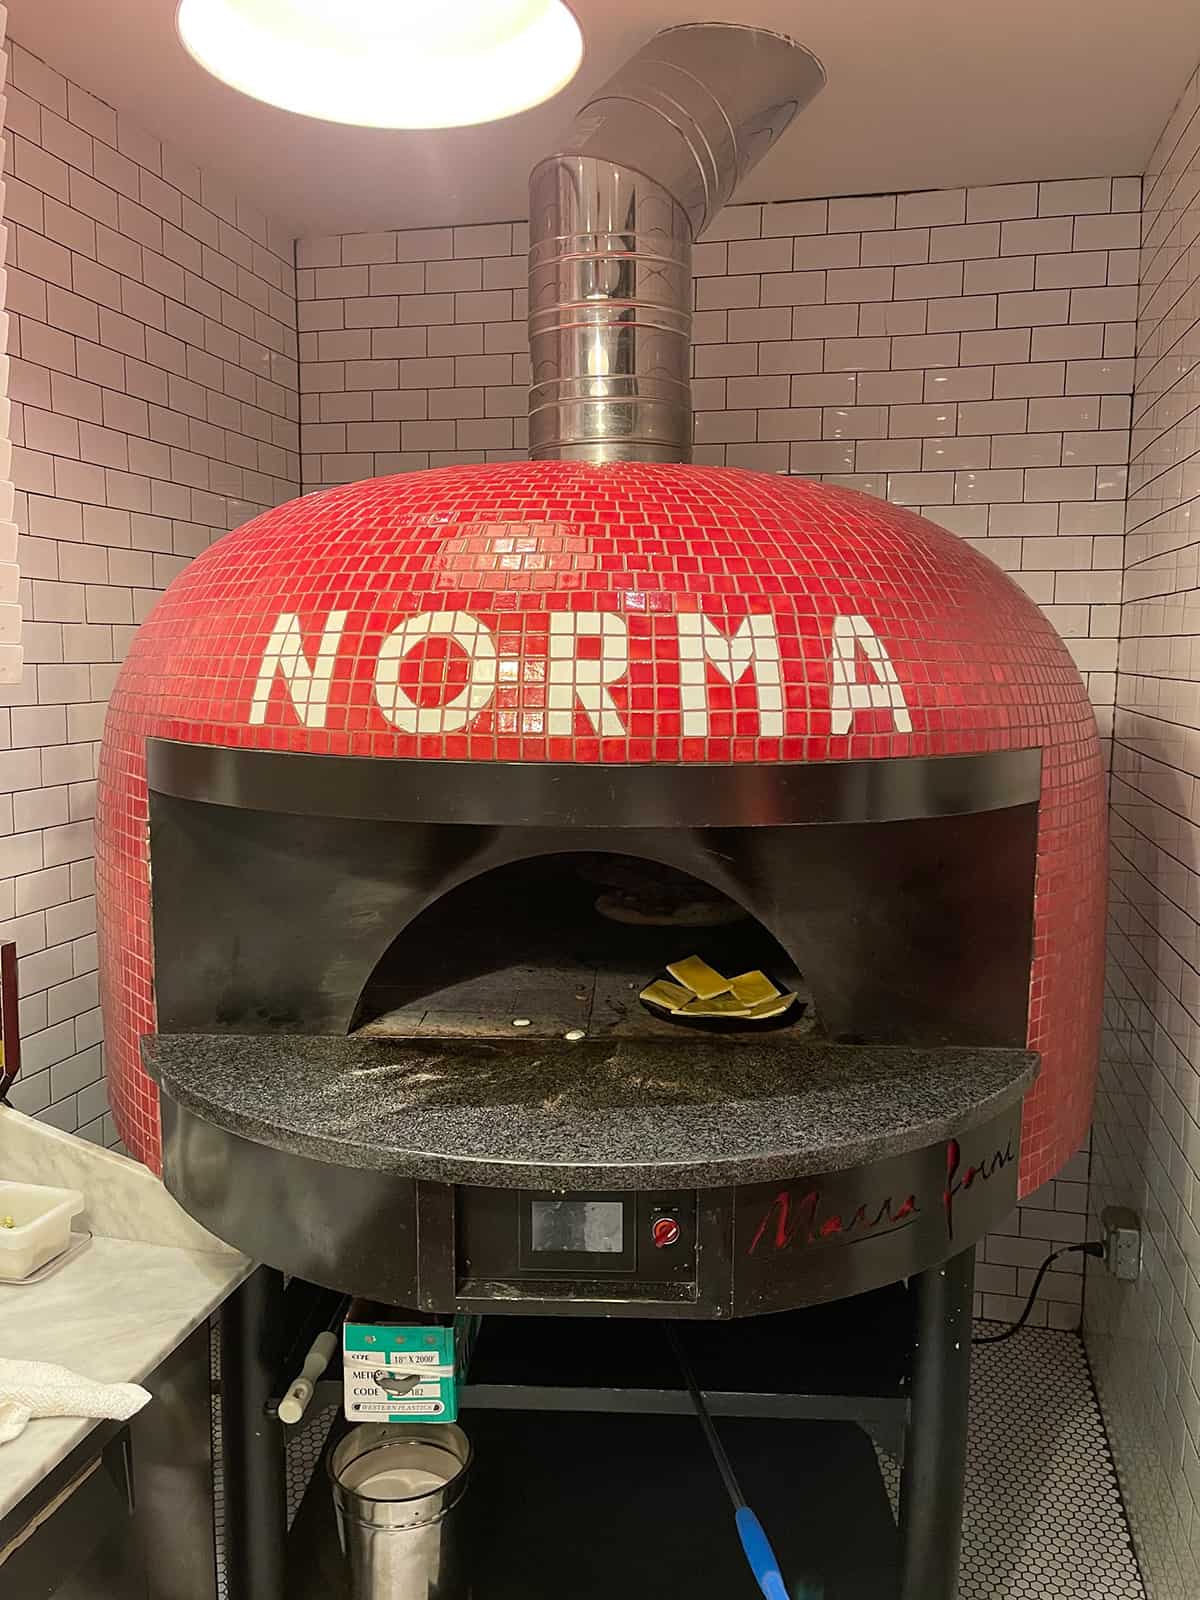 The Norma pizza oven.